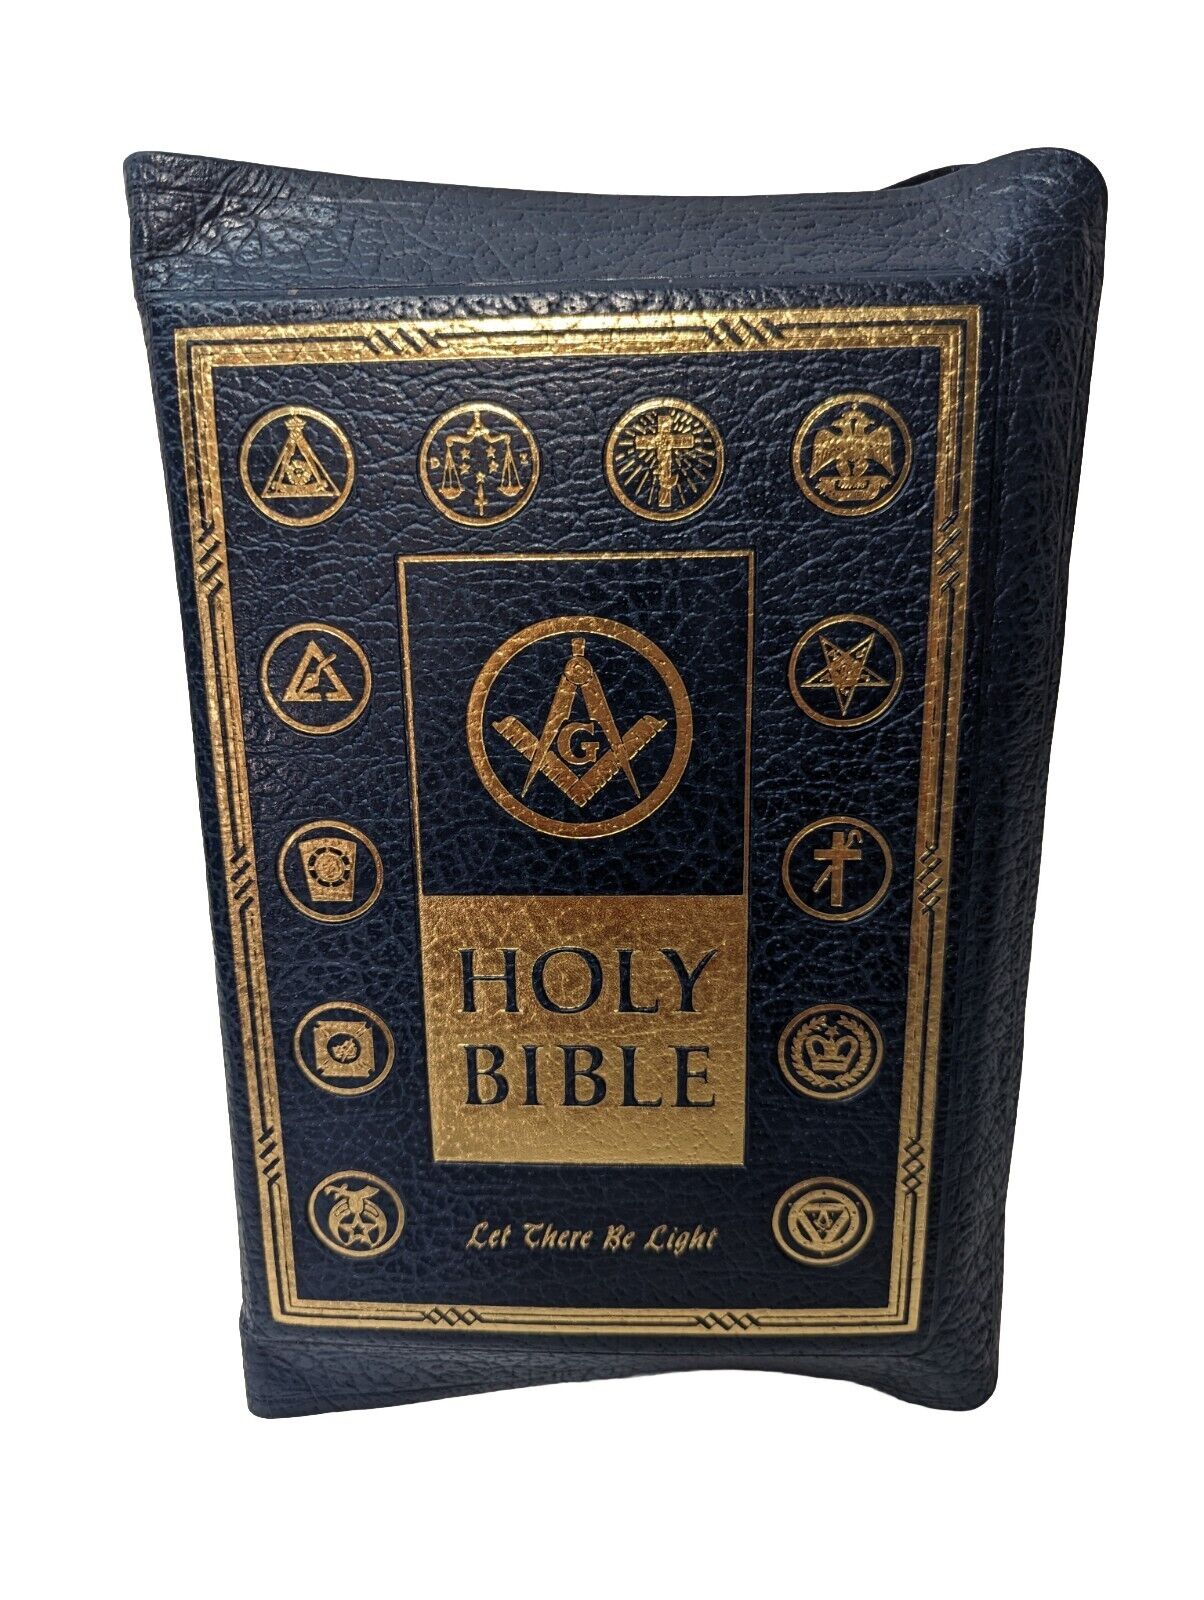 Vintage Holy Bible Let There Be Light Masonic Edition 1955 Leather Binding HTF